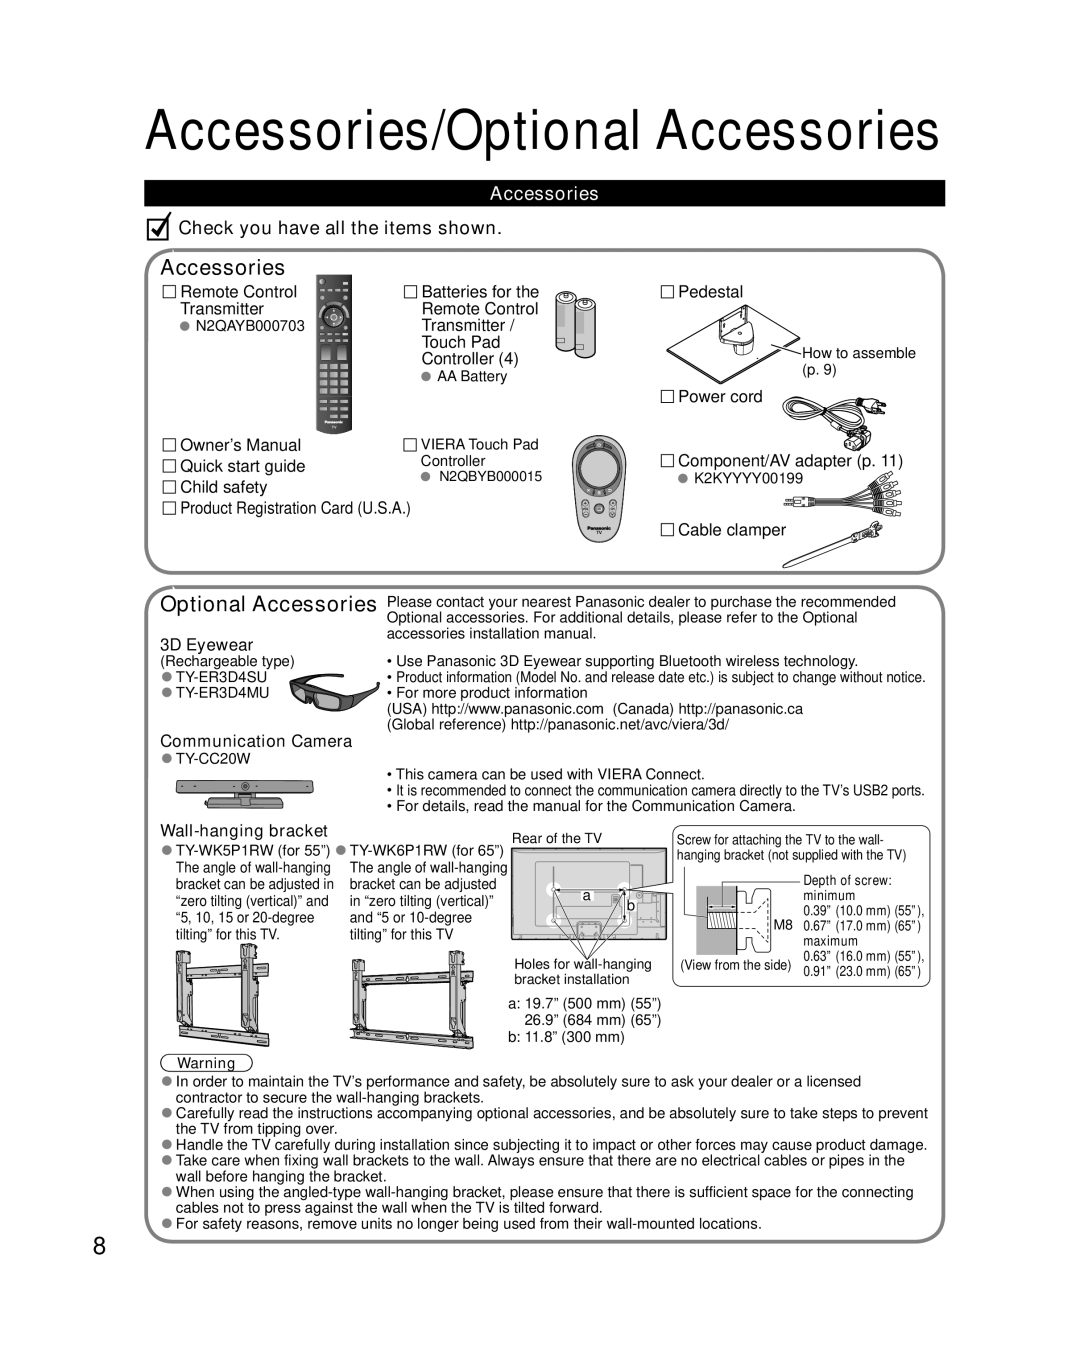 Panasonic TC-P55VT50, TC-P65VT50 Accessories/Optional Accessories, Check you have all the items shown, 3D Eyewear 